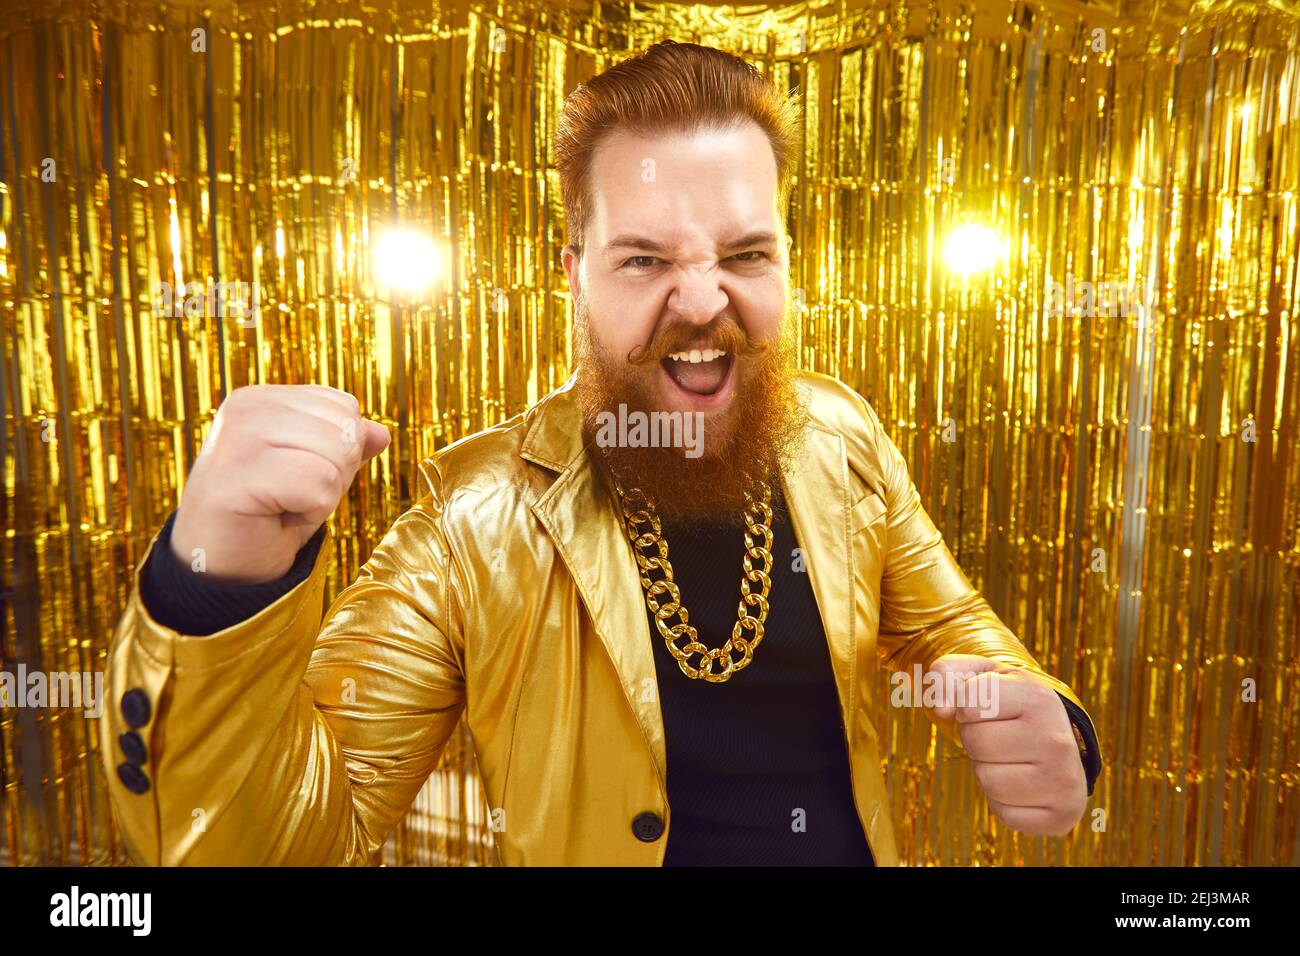 Funny bearded man in shiny golden jacket and gold chain having fun at disco party Stock Photo